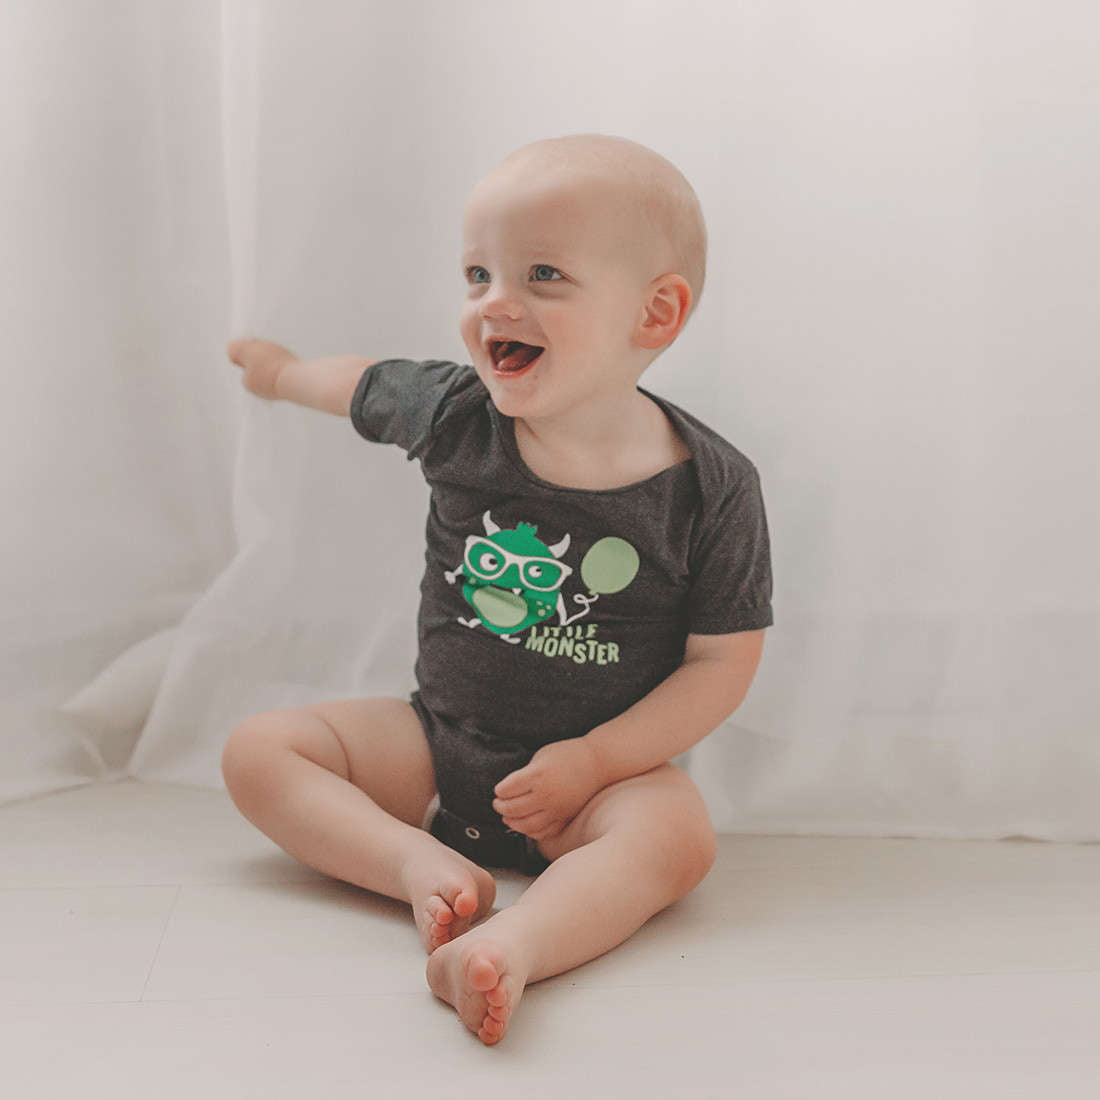 Little Monster baby bodysuit - Sweetpea and Co.